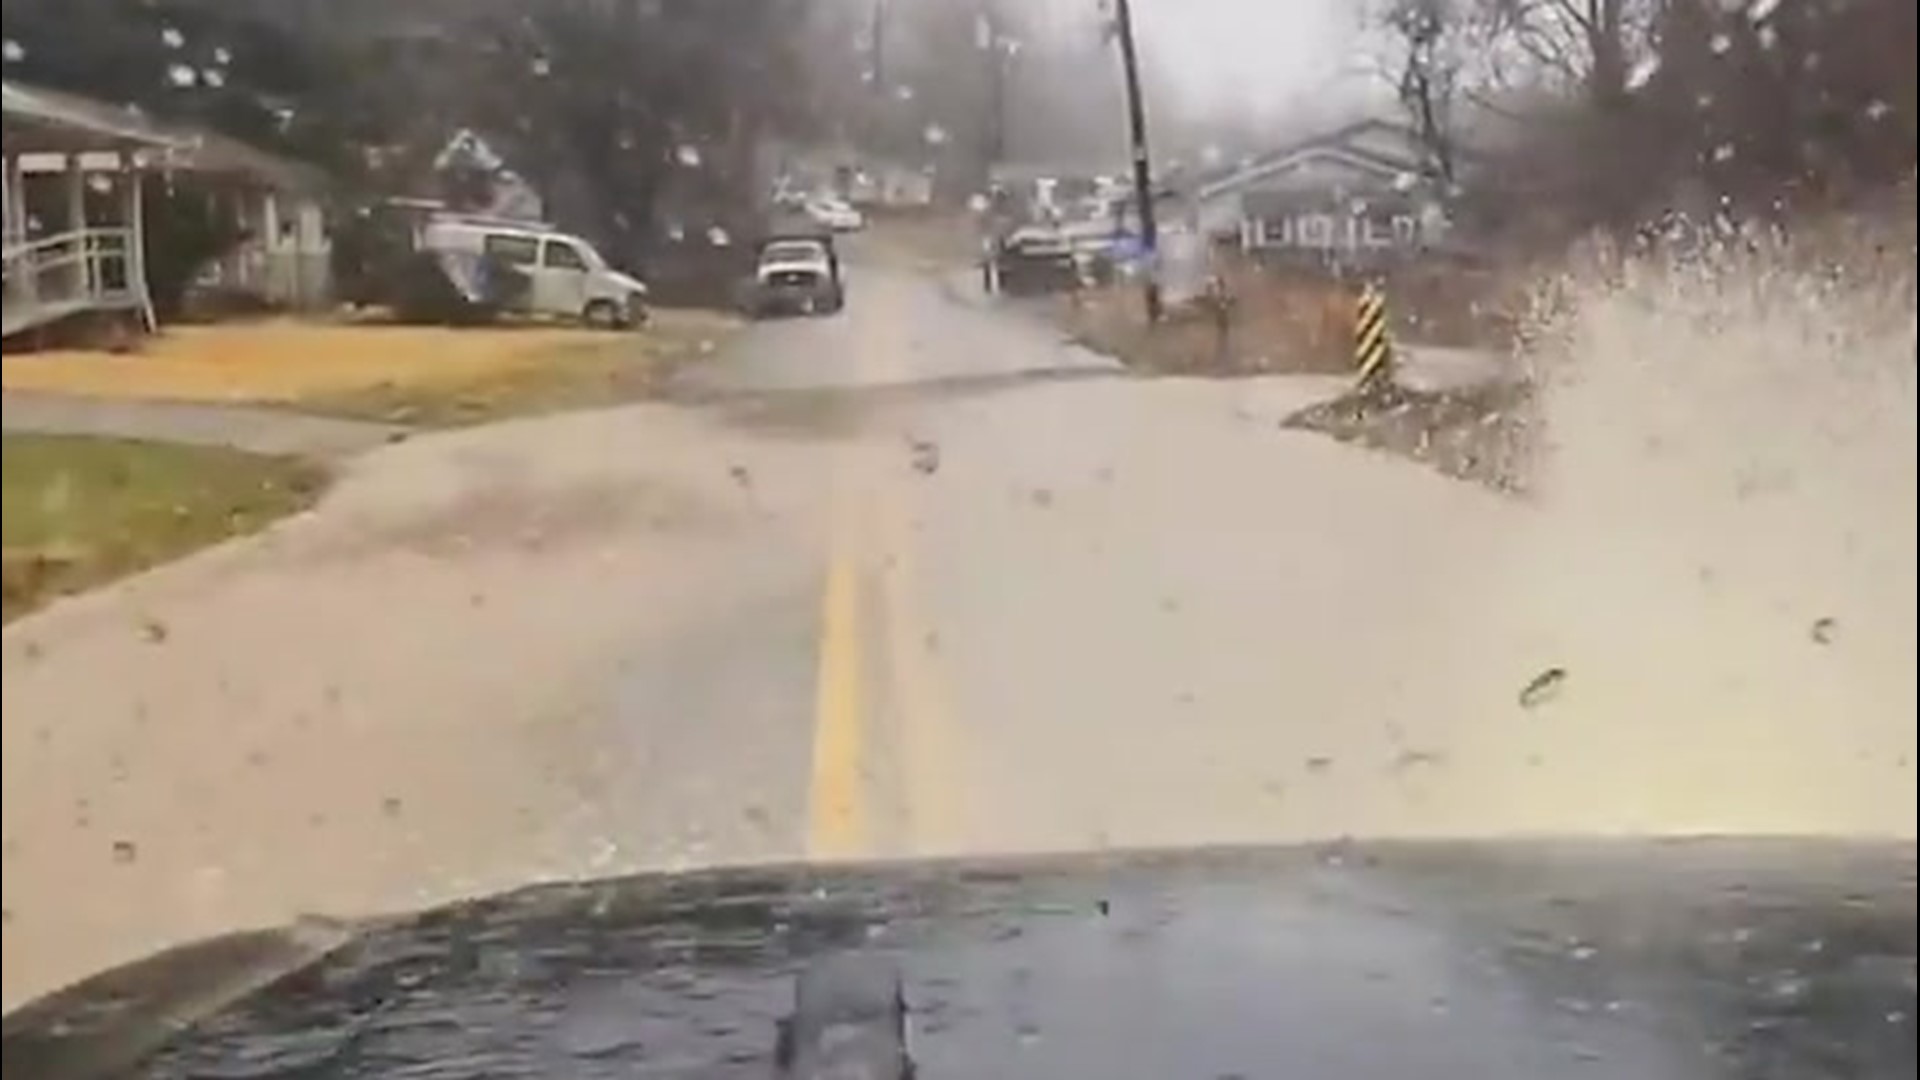 As heavy rain pounded the Southeast on Feb. 28, flash flooding led to roads covered with water in Huntington.